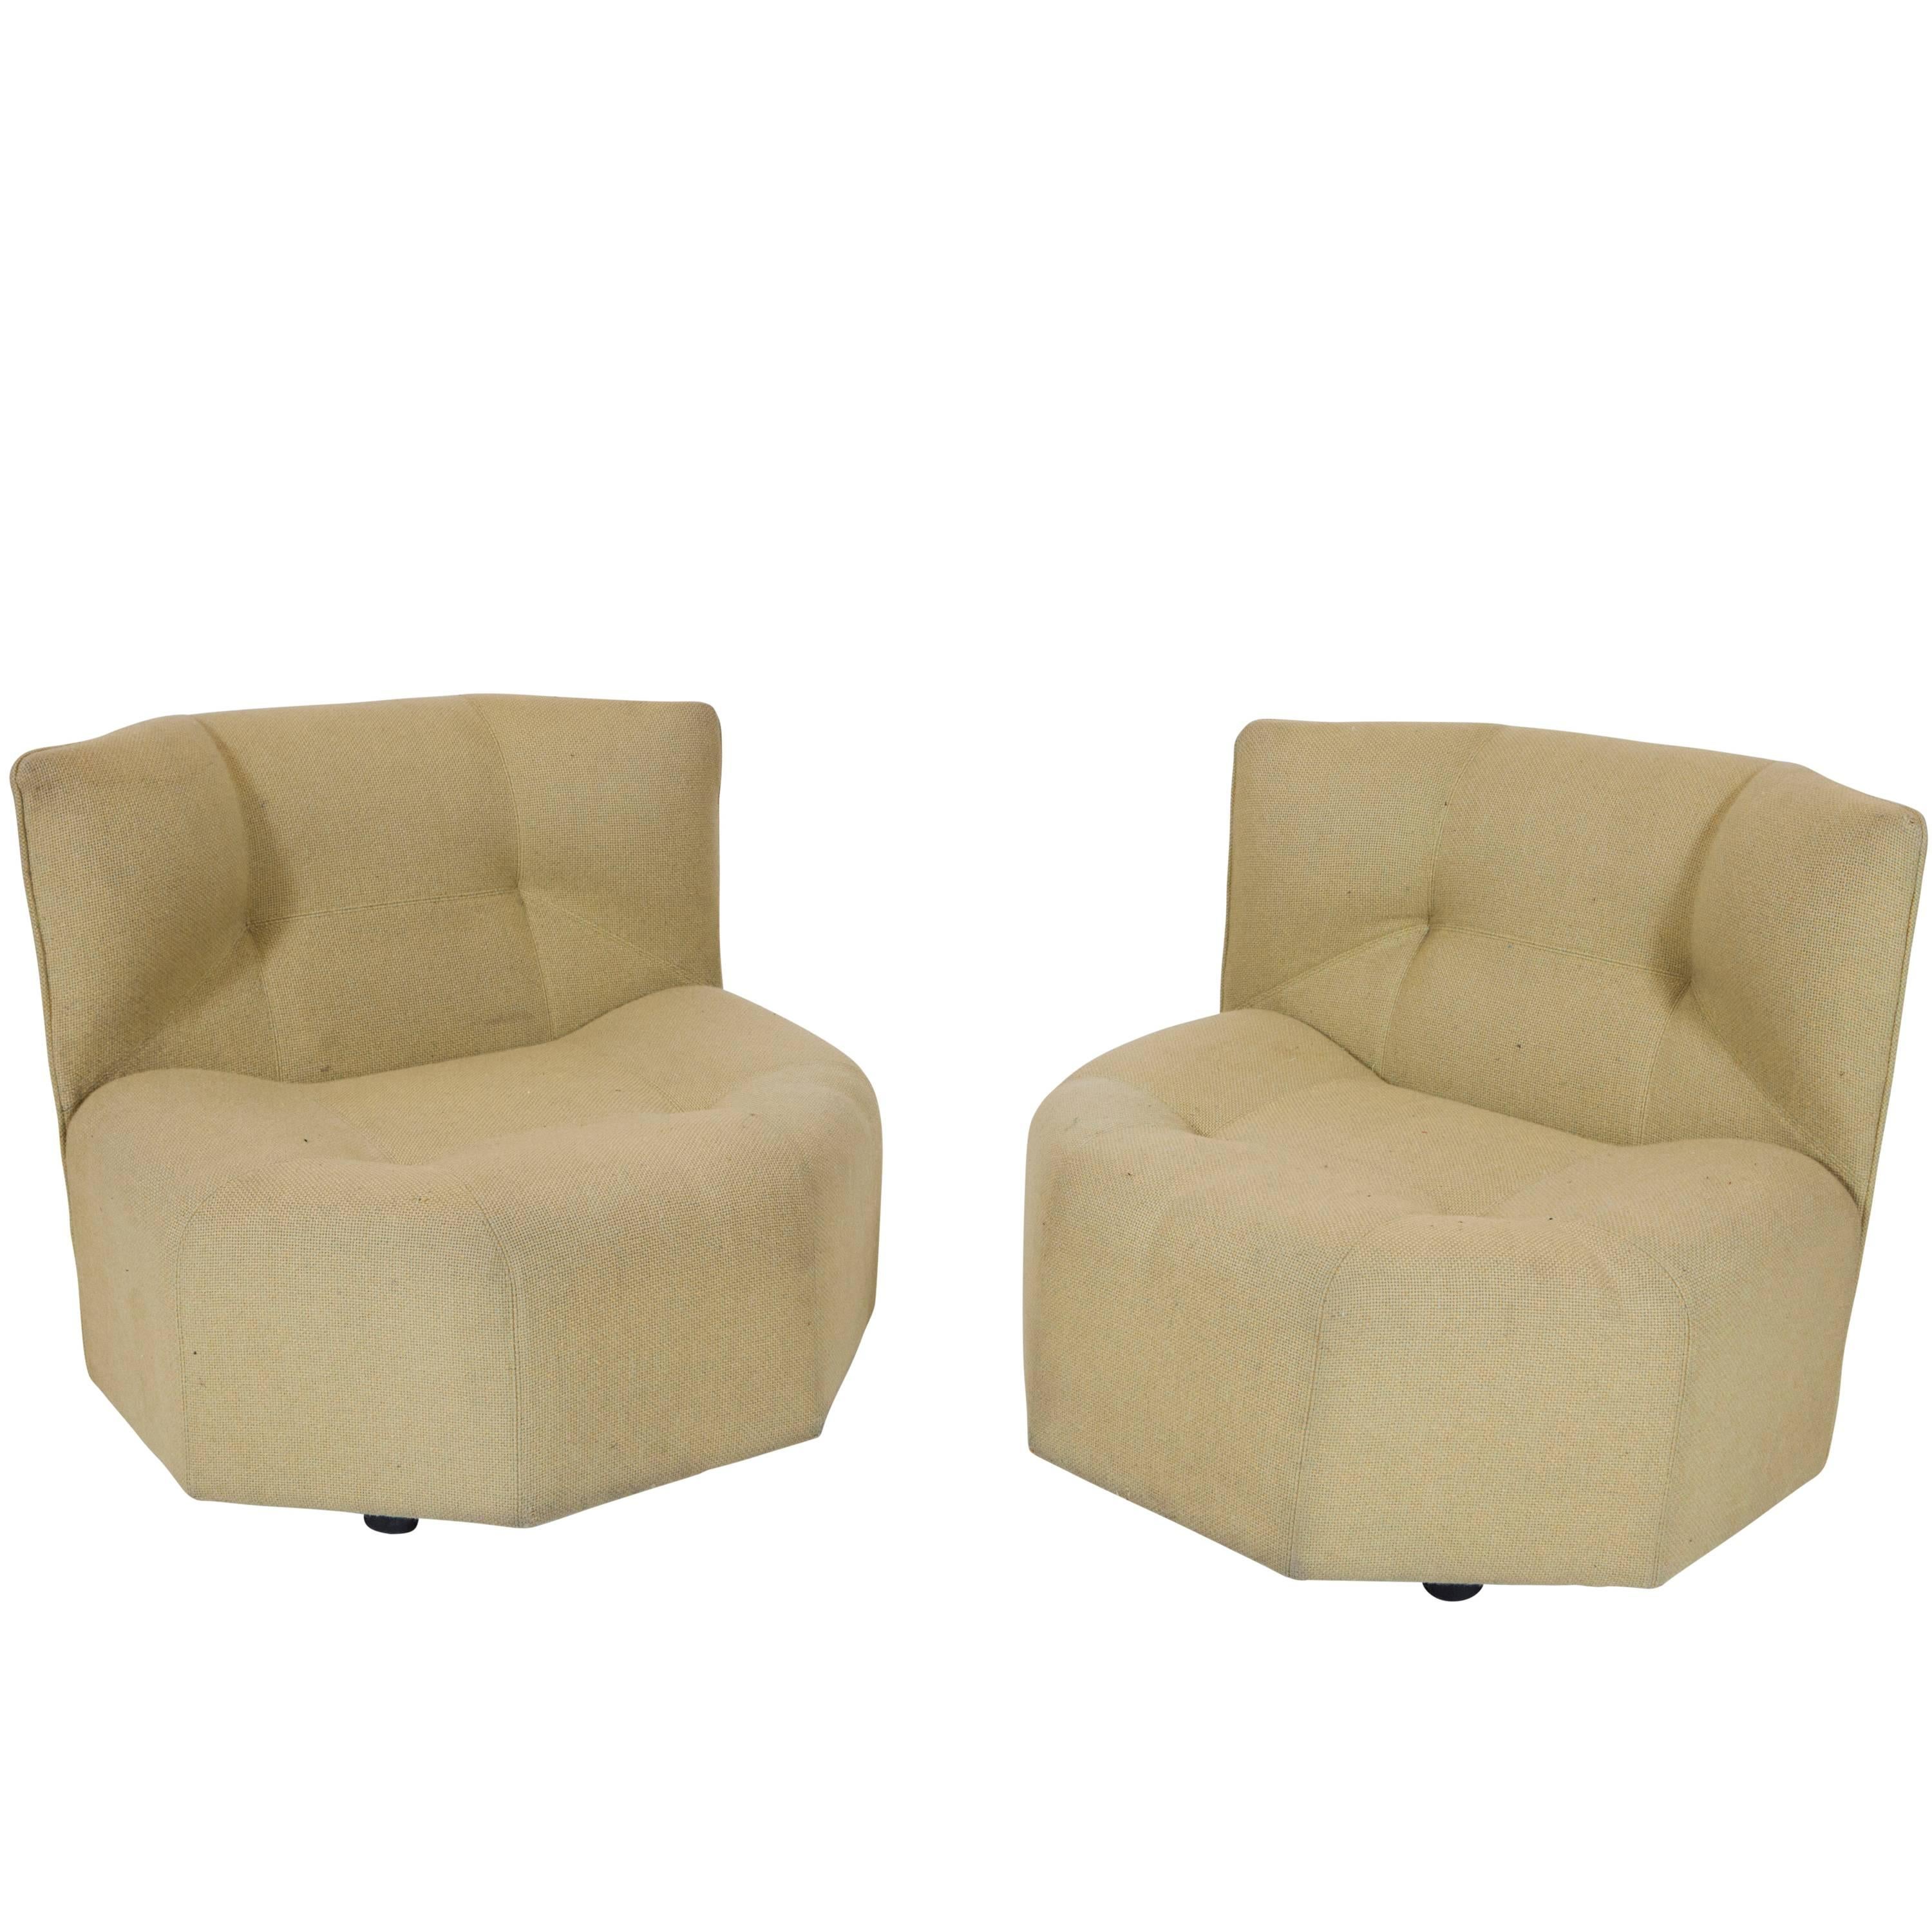 Pair of Octa Fauteuil, Italy, 1970s